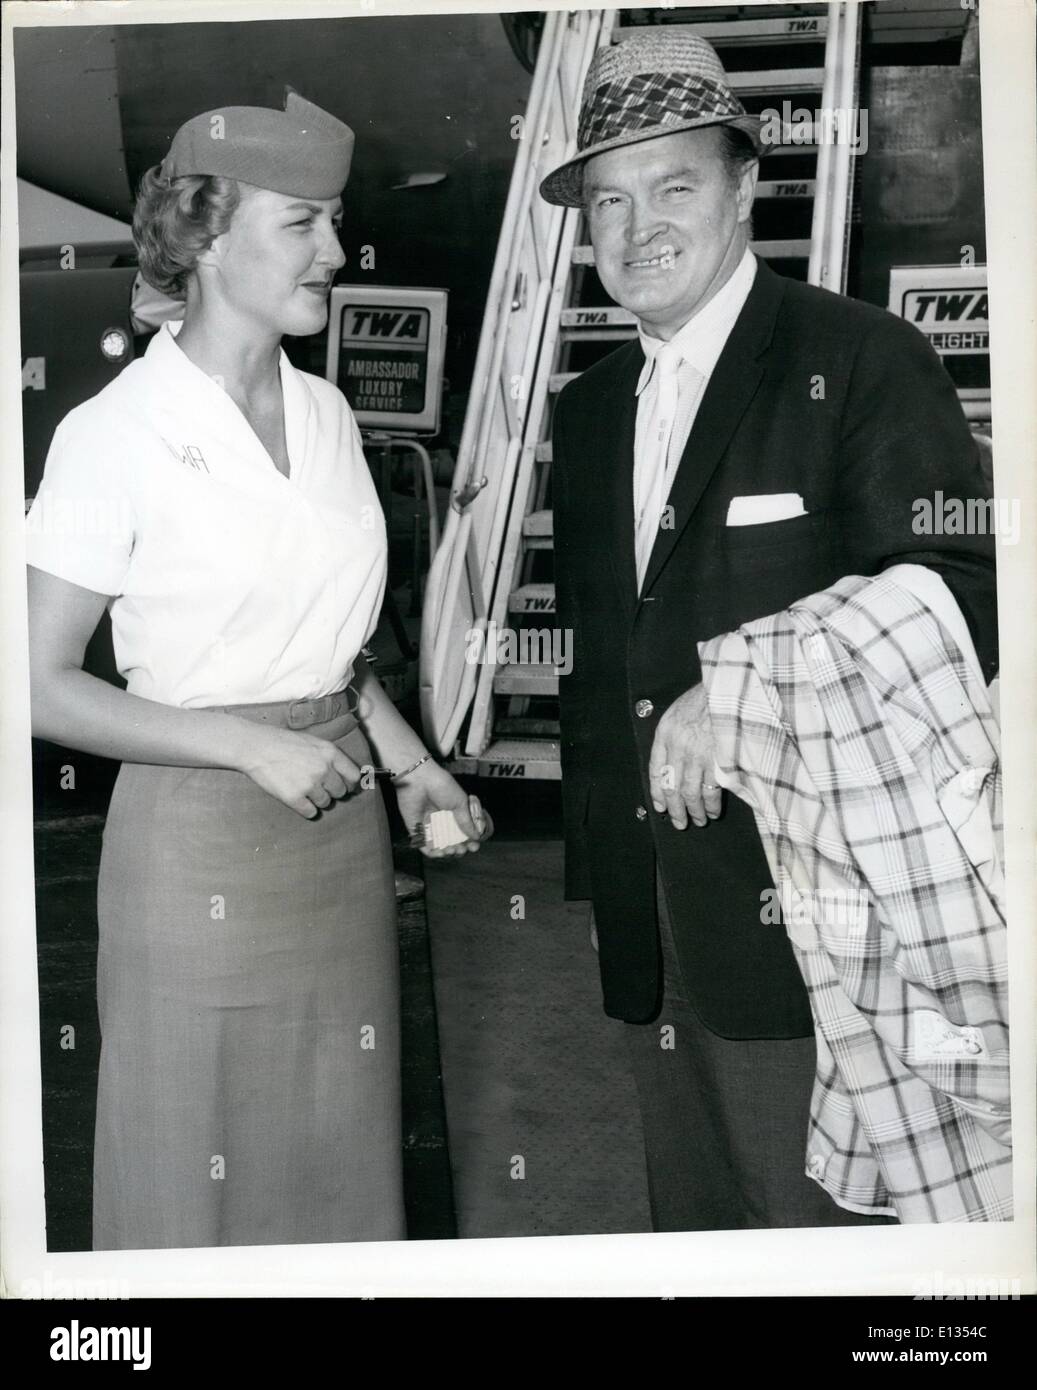 Feb. 26, 2012 - N.Y. International Airport, July 29 - Popular Comedian, Bob Hope Is Greeted By TWA Hostess Lucille Linciewicz Before Boarding A TWA Jetliner To Los Angeles, Where He Will Be On Hand To Celebrate His Daughter's Birthday. Hope Has Been In Town For 3 Days Following His 3 Week Visit In Europe Where He Helped Publicize His Movie ''Alias Jesse James' Stock Photo